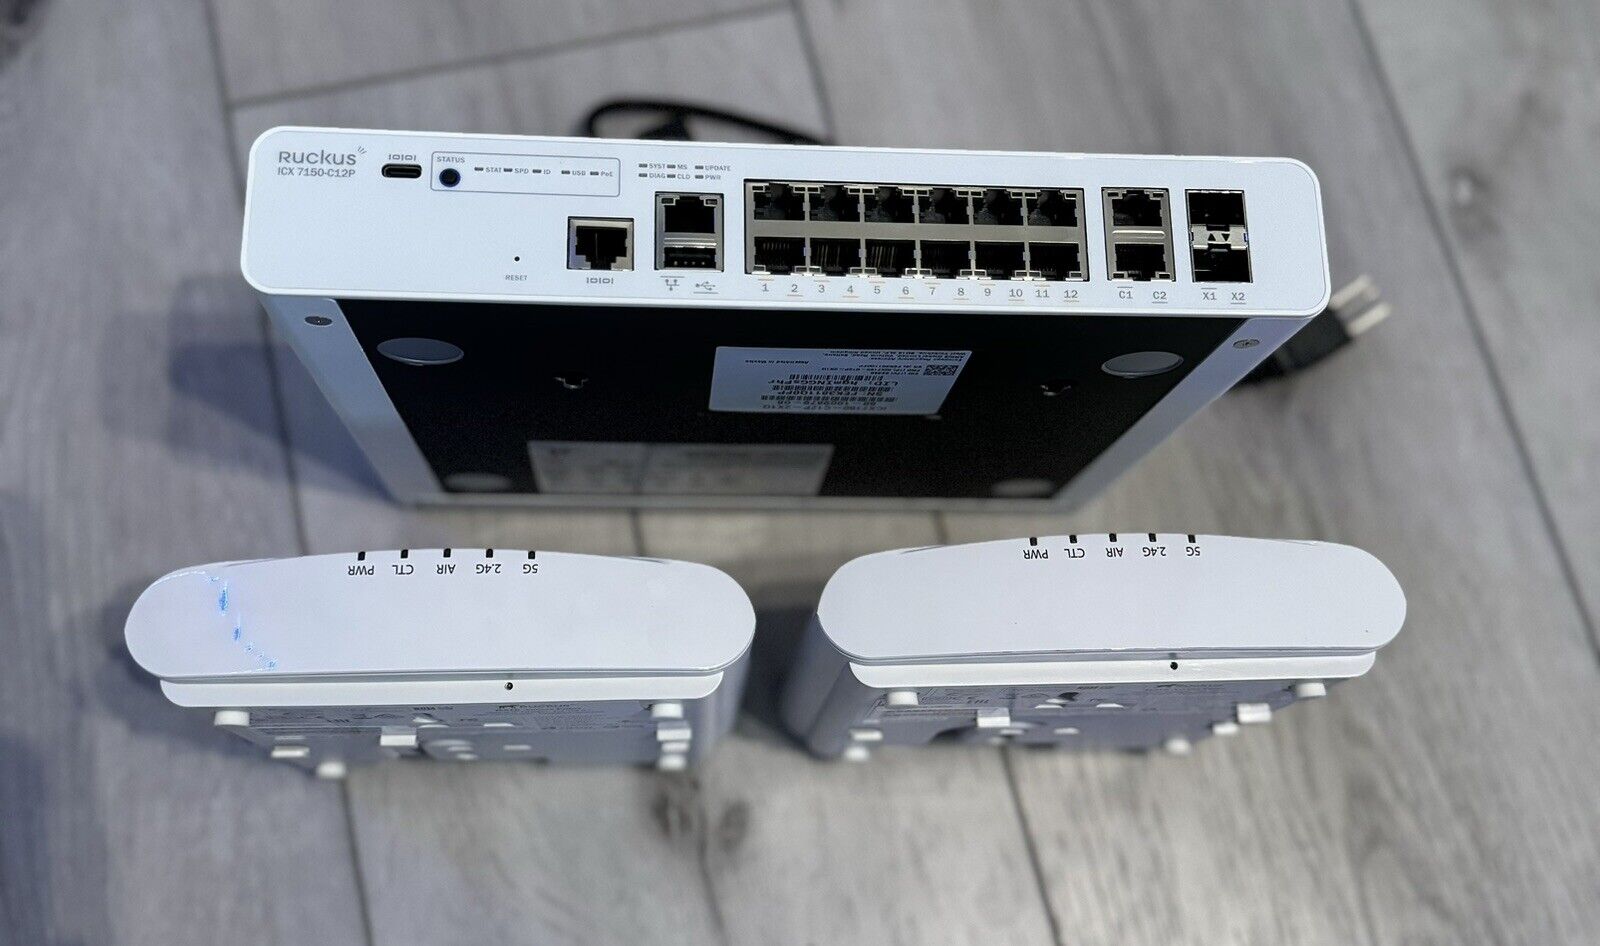 Ruckus ICX 7150-C12P 12-Ports Rack Compact PoE Switch AND 2 Ruckus R510 APs